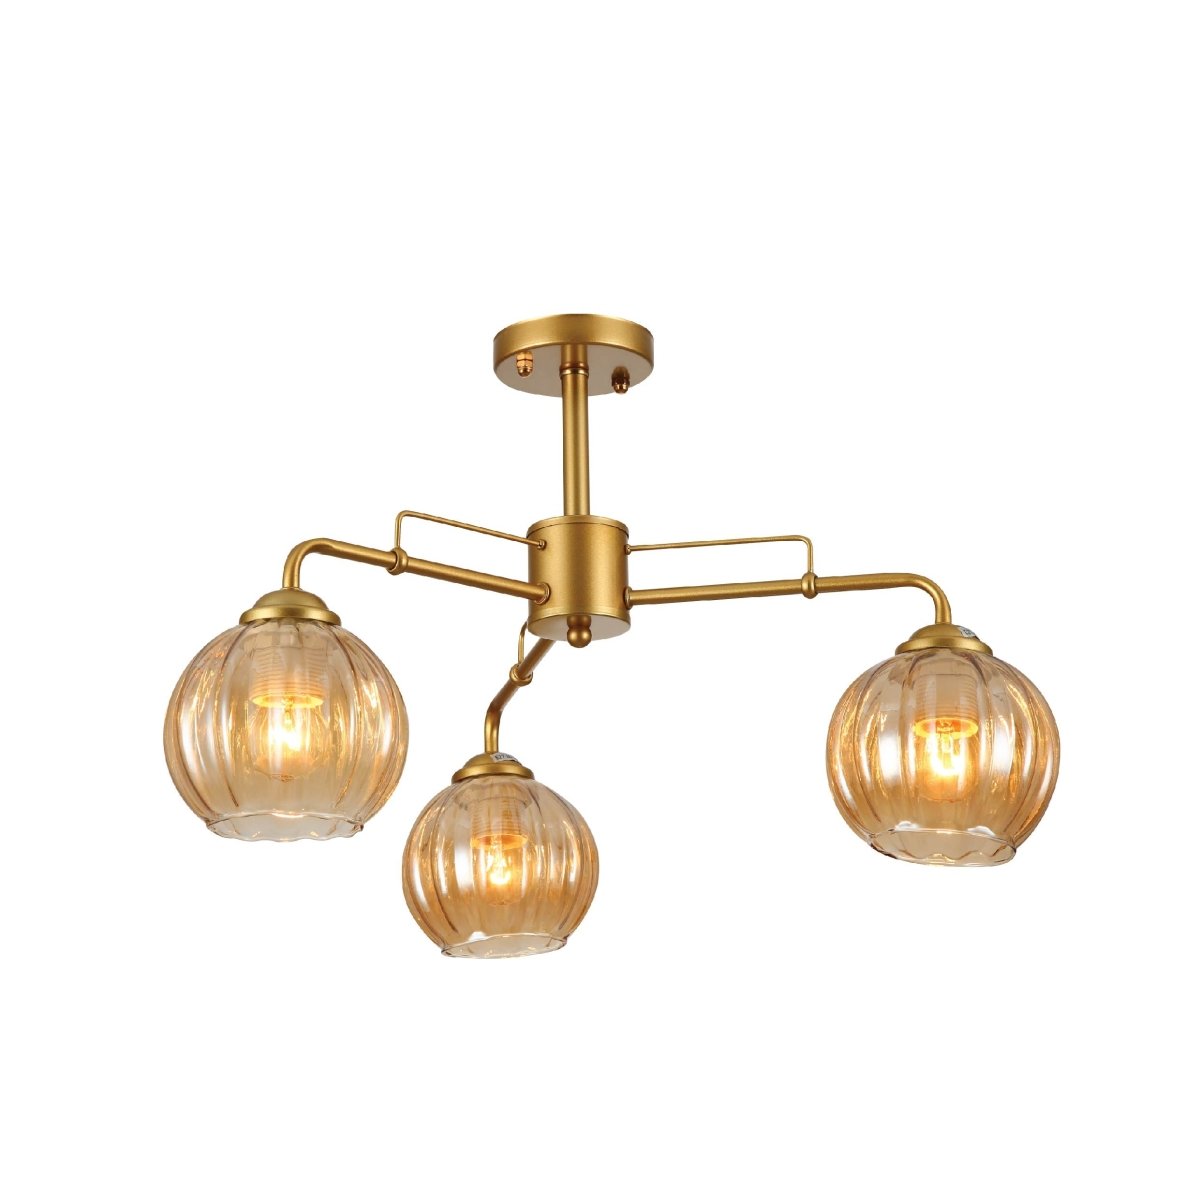 Interior application of Amber Reeded Globe Glass Gold Metal Industrial Vintage Retro Semi Flush Ceiling Light with E27 Fittings | TEKLED 159-17654